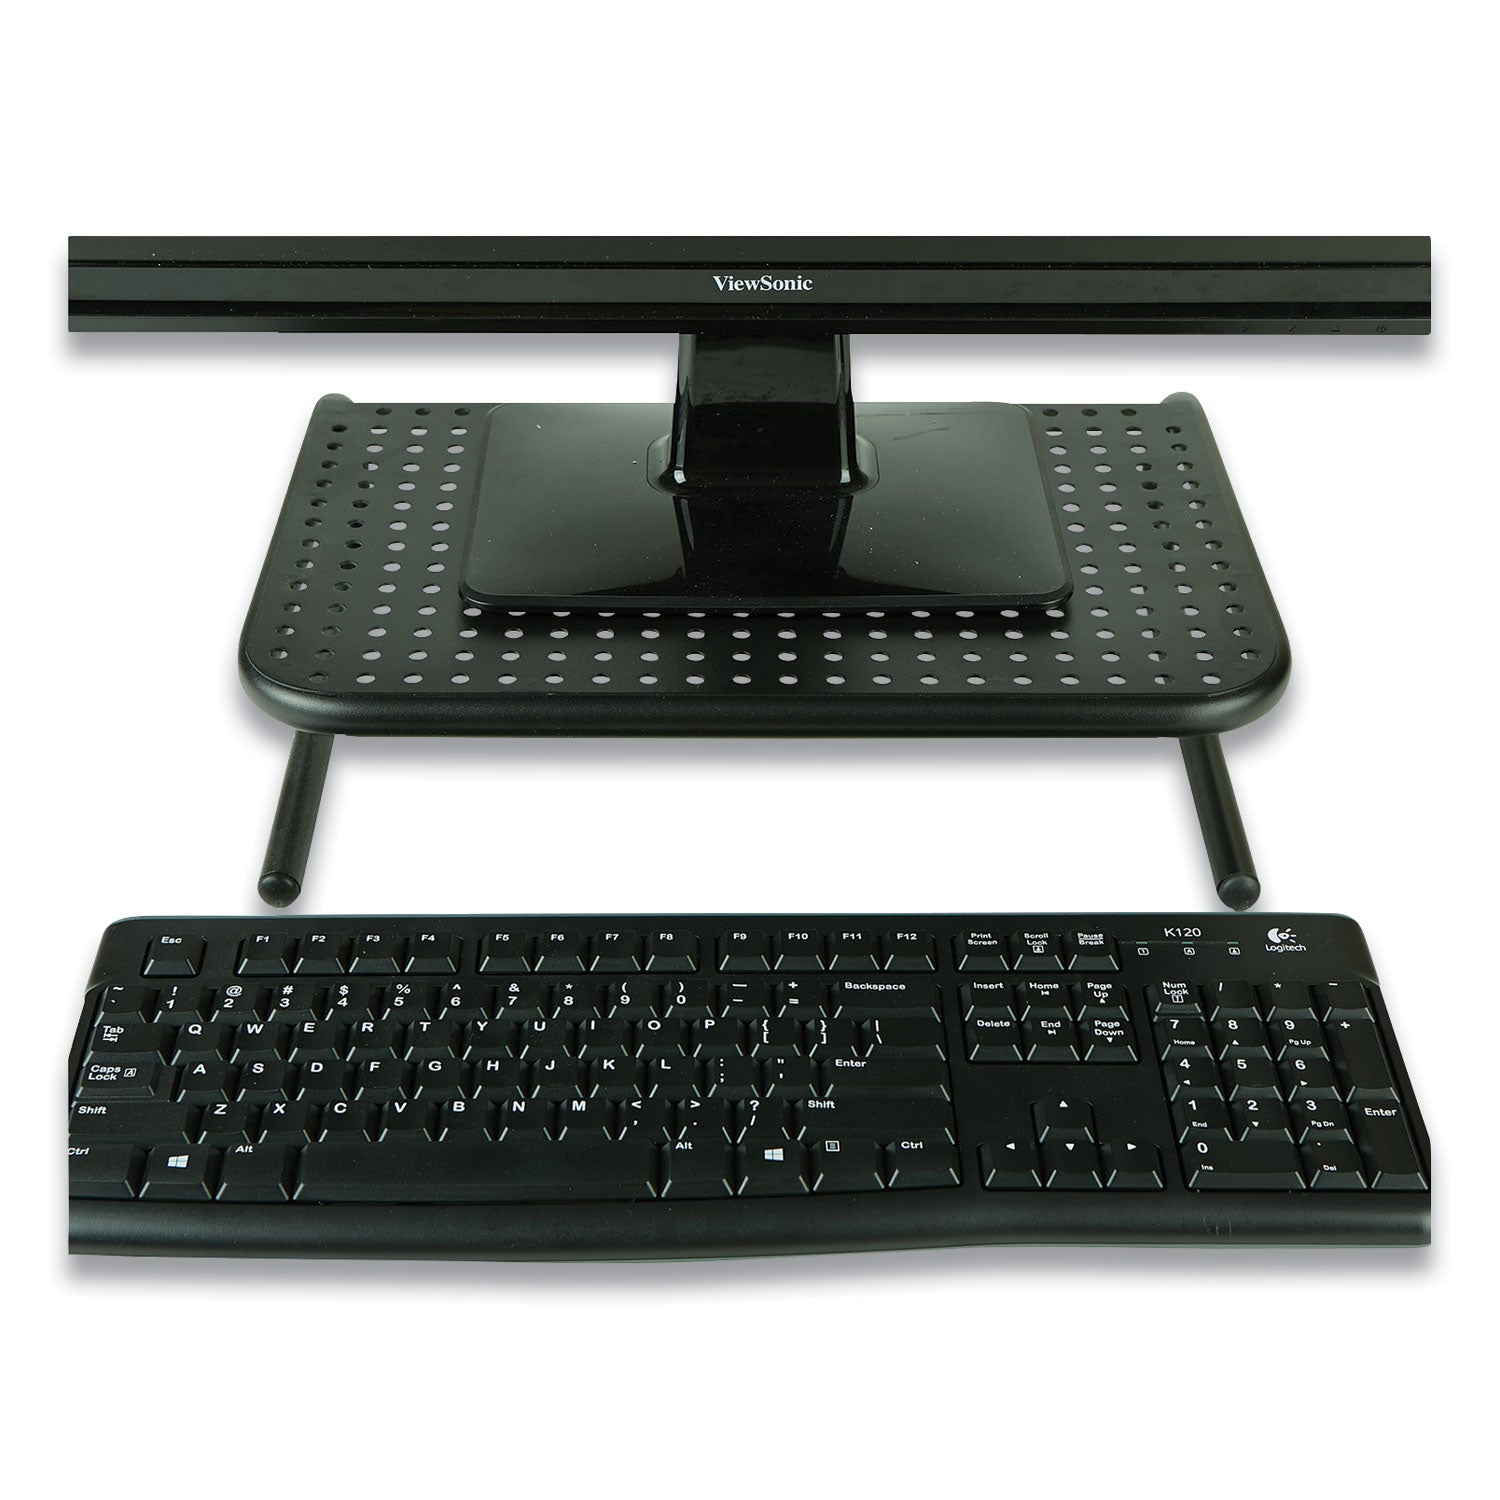 metal-monitor-stand-riser-for-computer-1488-x-1133-x-421-black-supports-44-lbs_ems2metmonstblk - 4